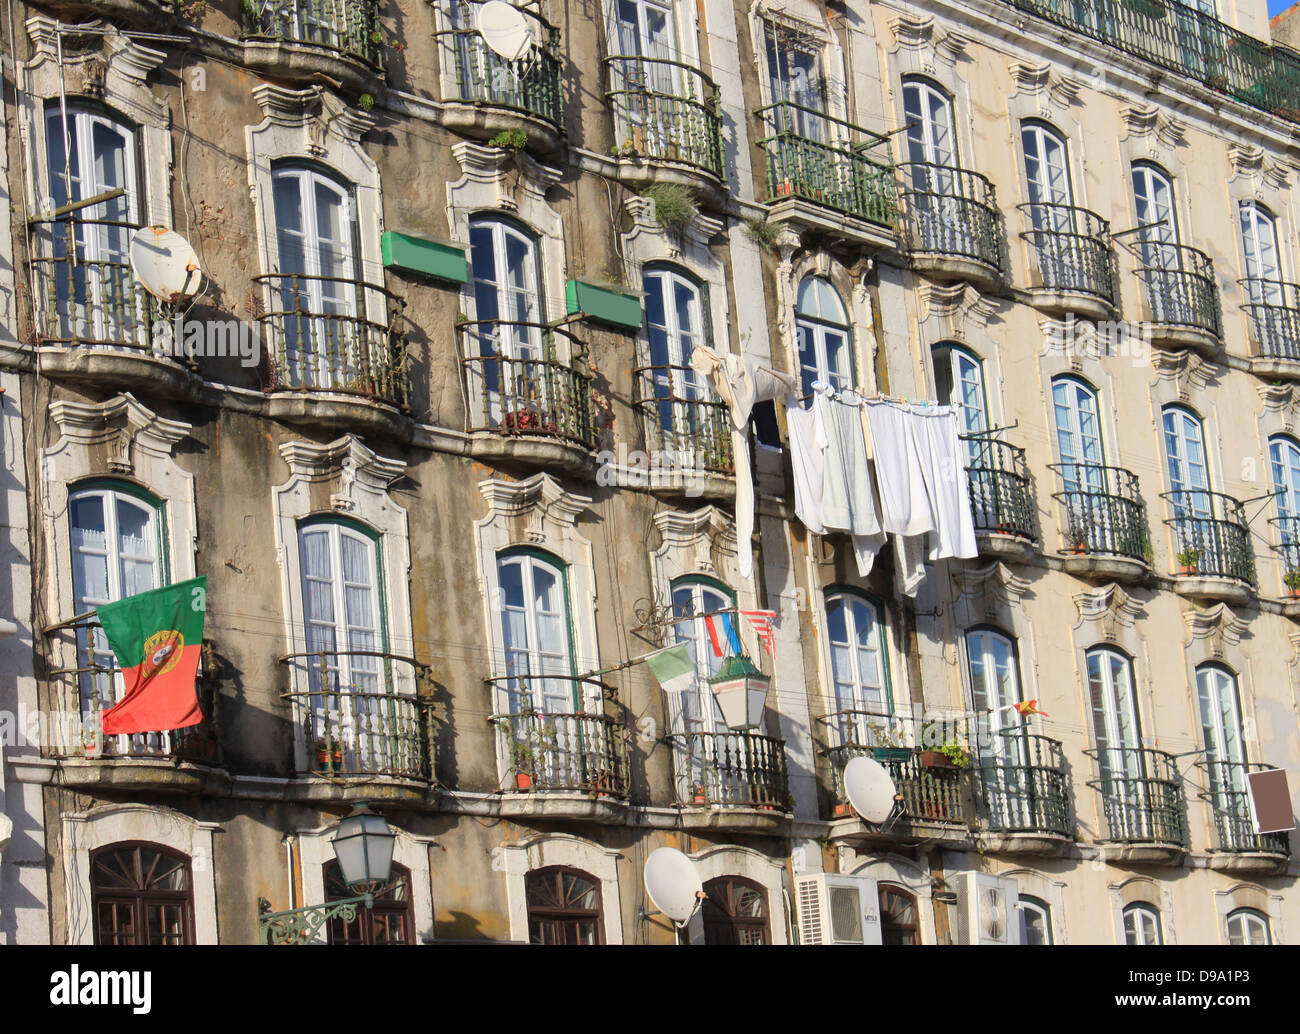 Windows in buildings of Alfama, Lisbon, showing laundry and balconies, Portugal Stock Photo